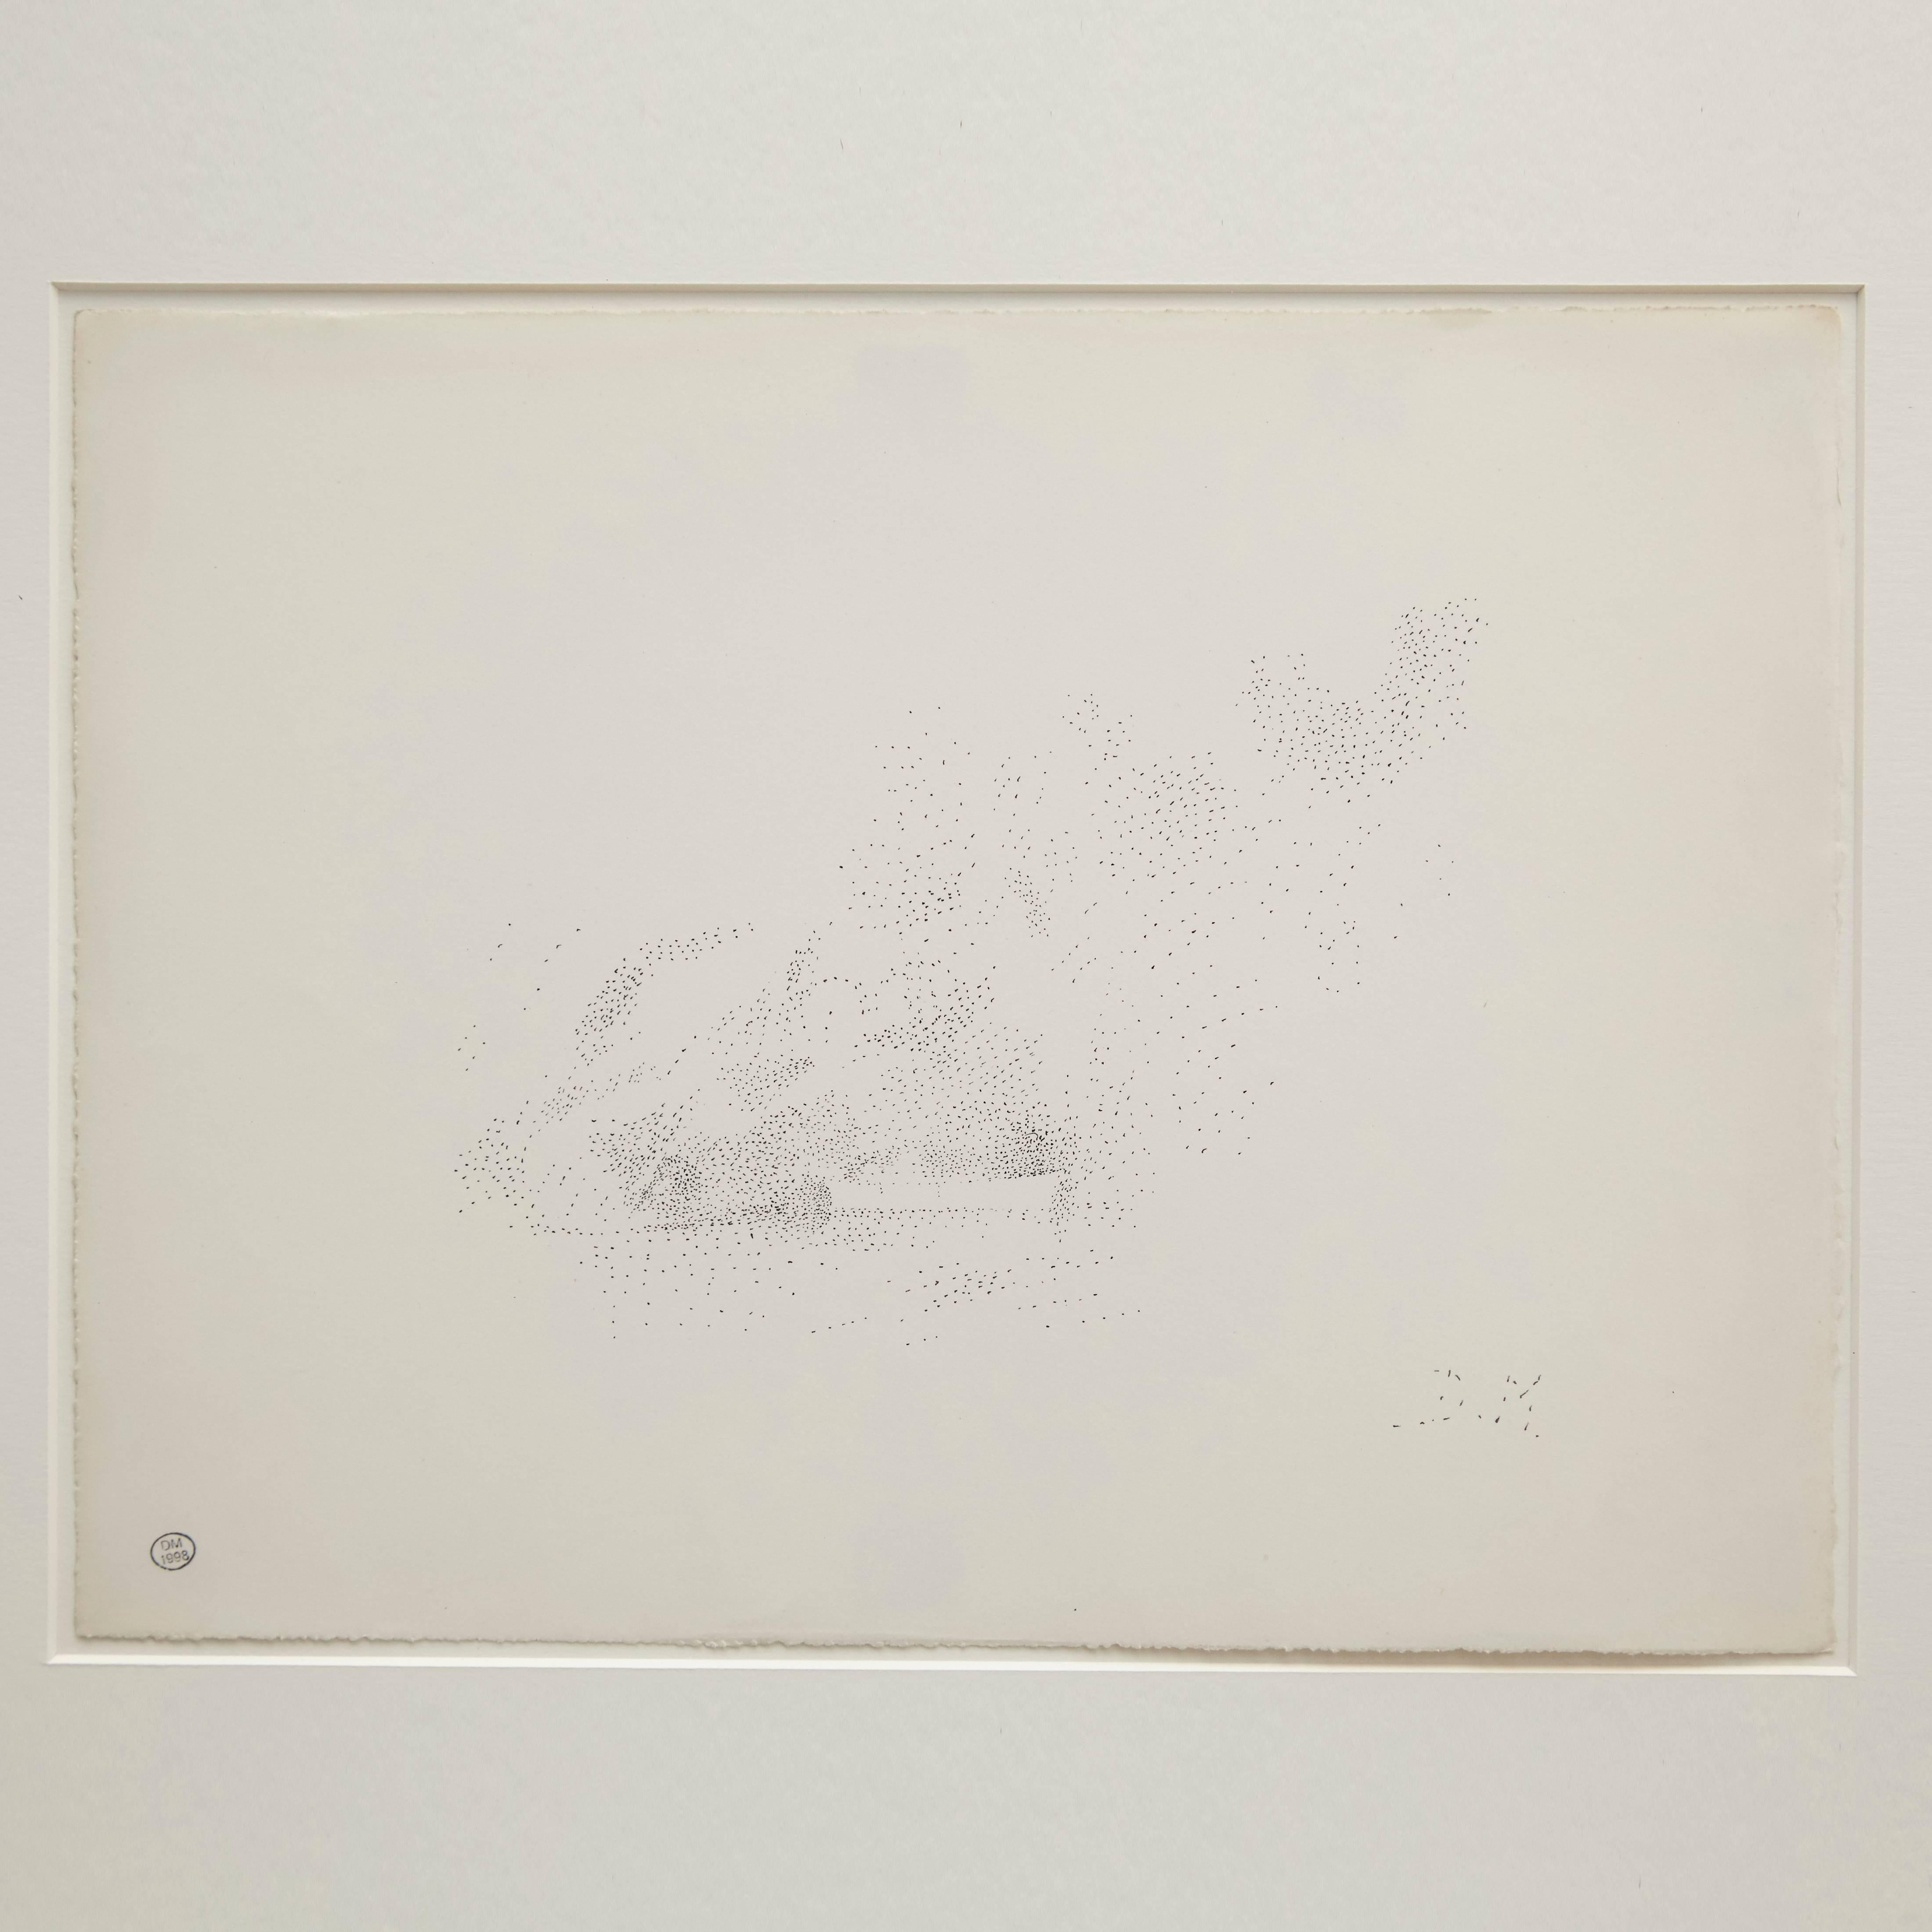 Pointillist composition by Dora Maar, circa 1960.

Authenticity stamp of the auction that took place in 1998 in Paris.
Black ink on cream white paper.
20th century, undated.


In good original condition, with minor wear consistent with age